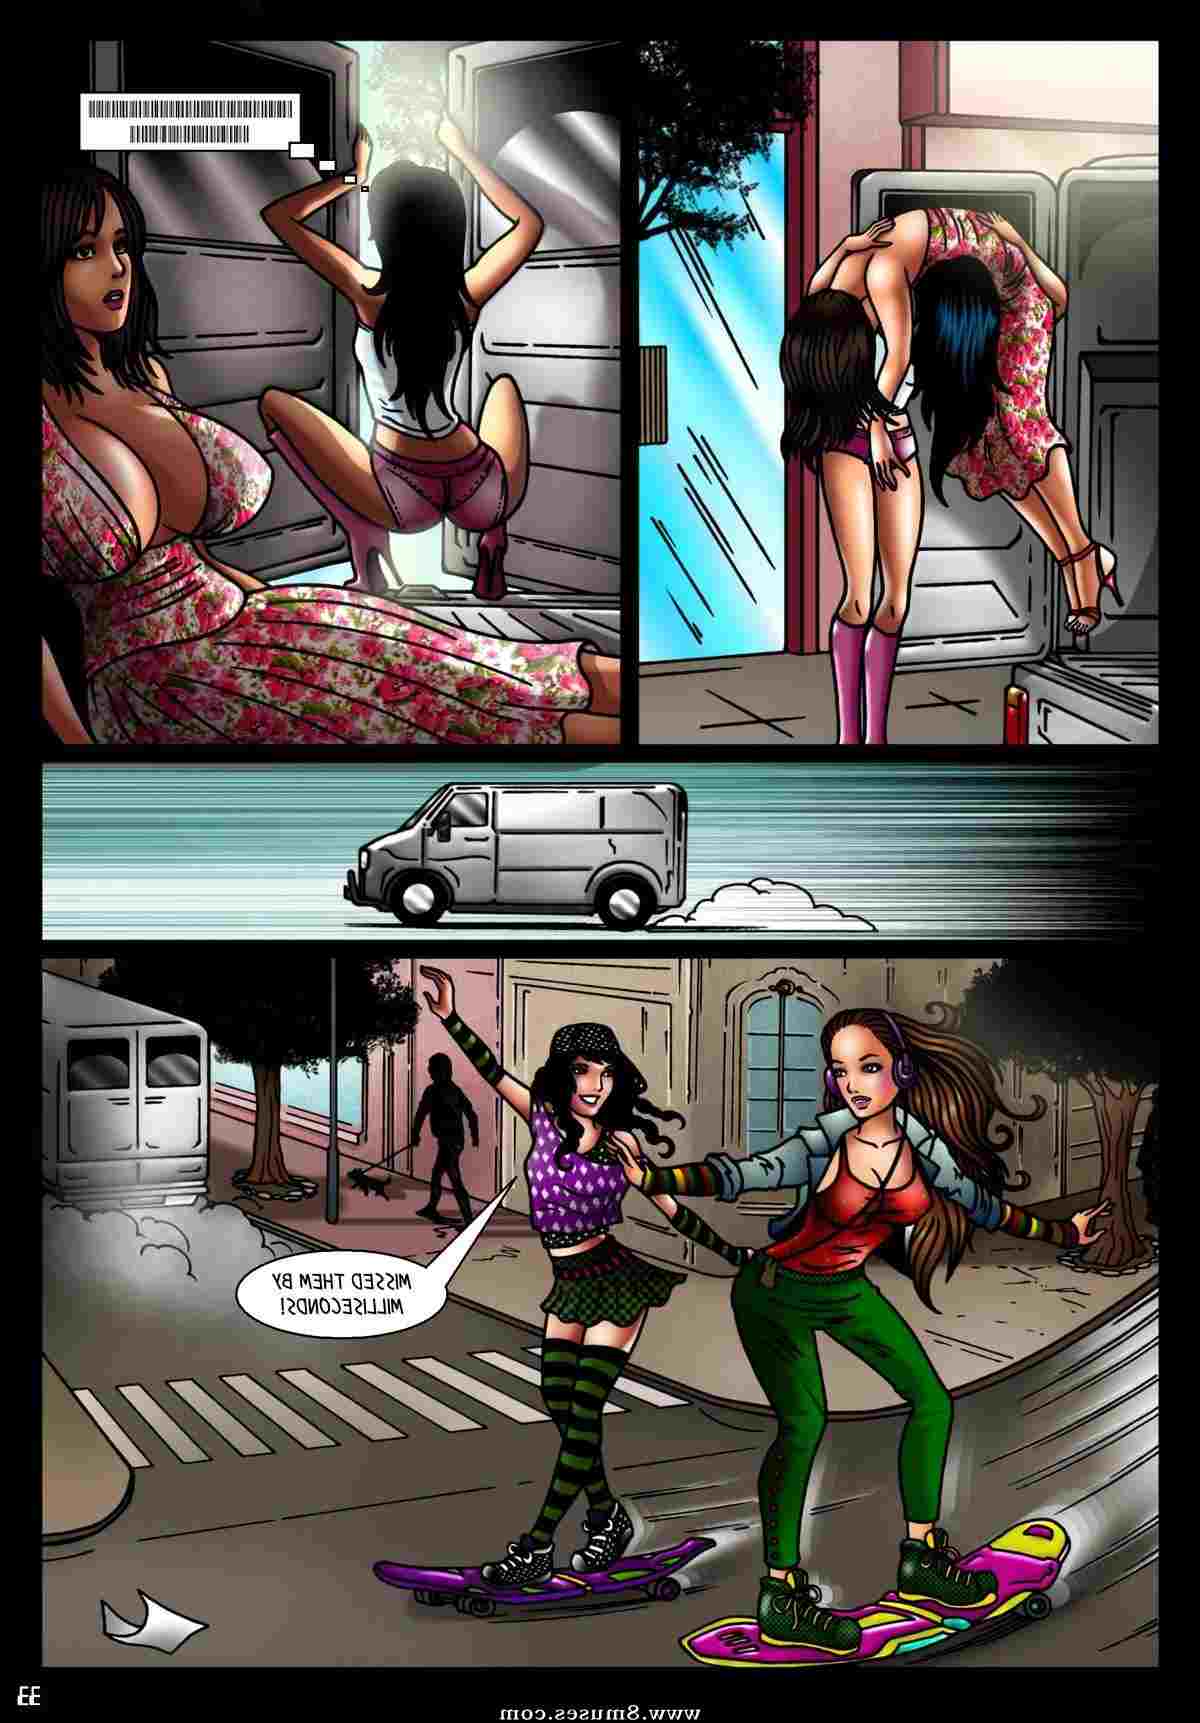 Various-Authors/AB-Lust/Shemale-Android-Sex-Sirens-Renegades Shemale_Android_Sex_Sirens_-_Renegades__8muses_-_Sex_and_Porn_Comics_34.jpg